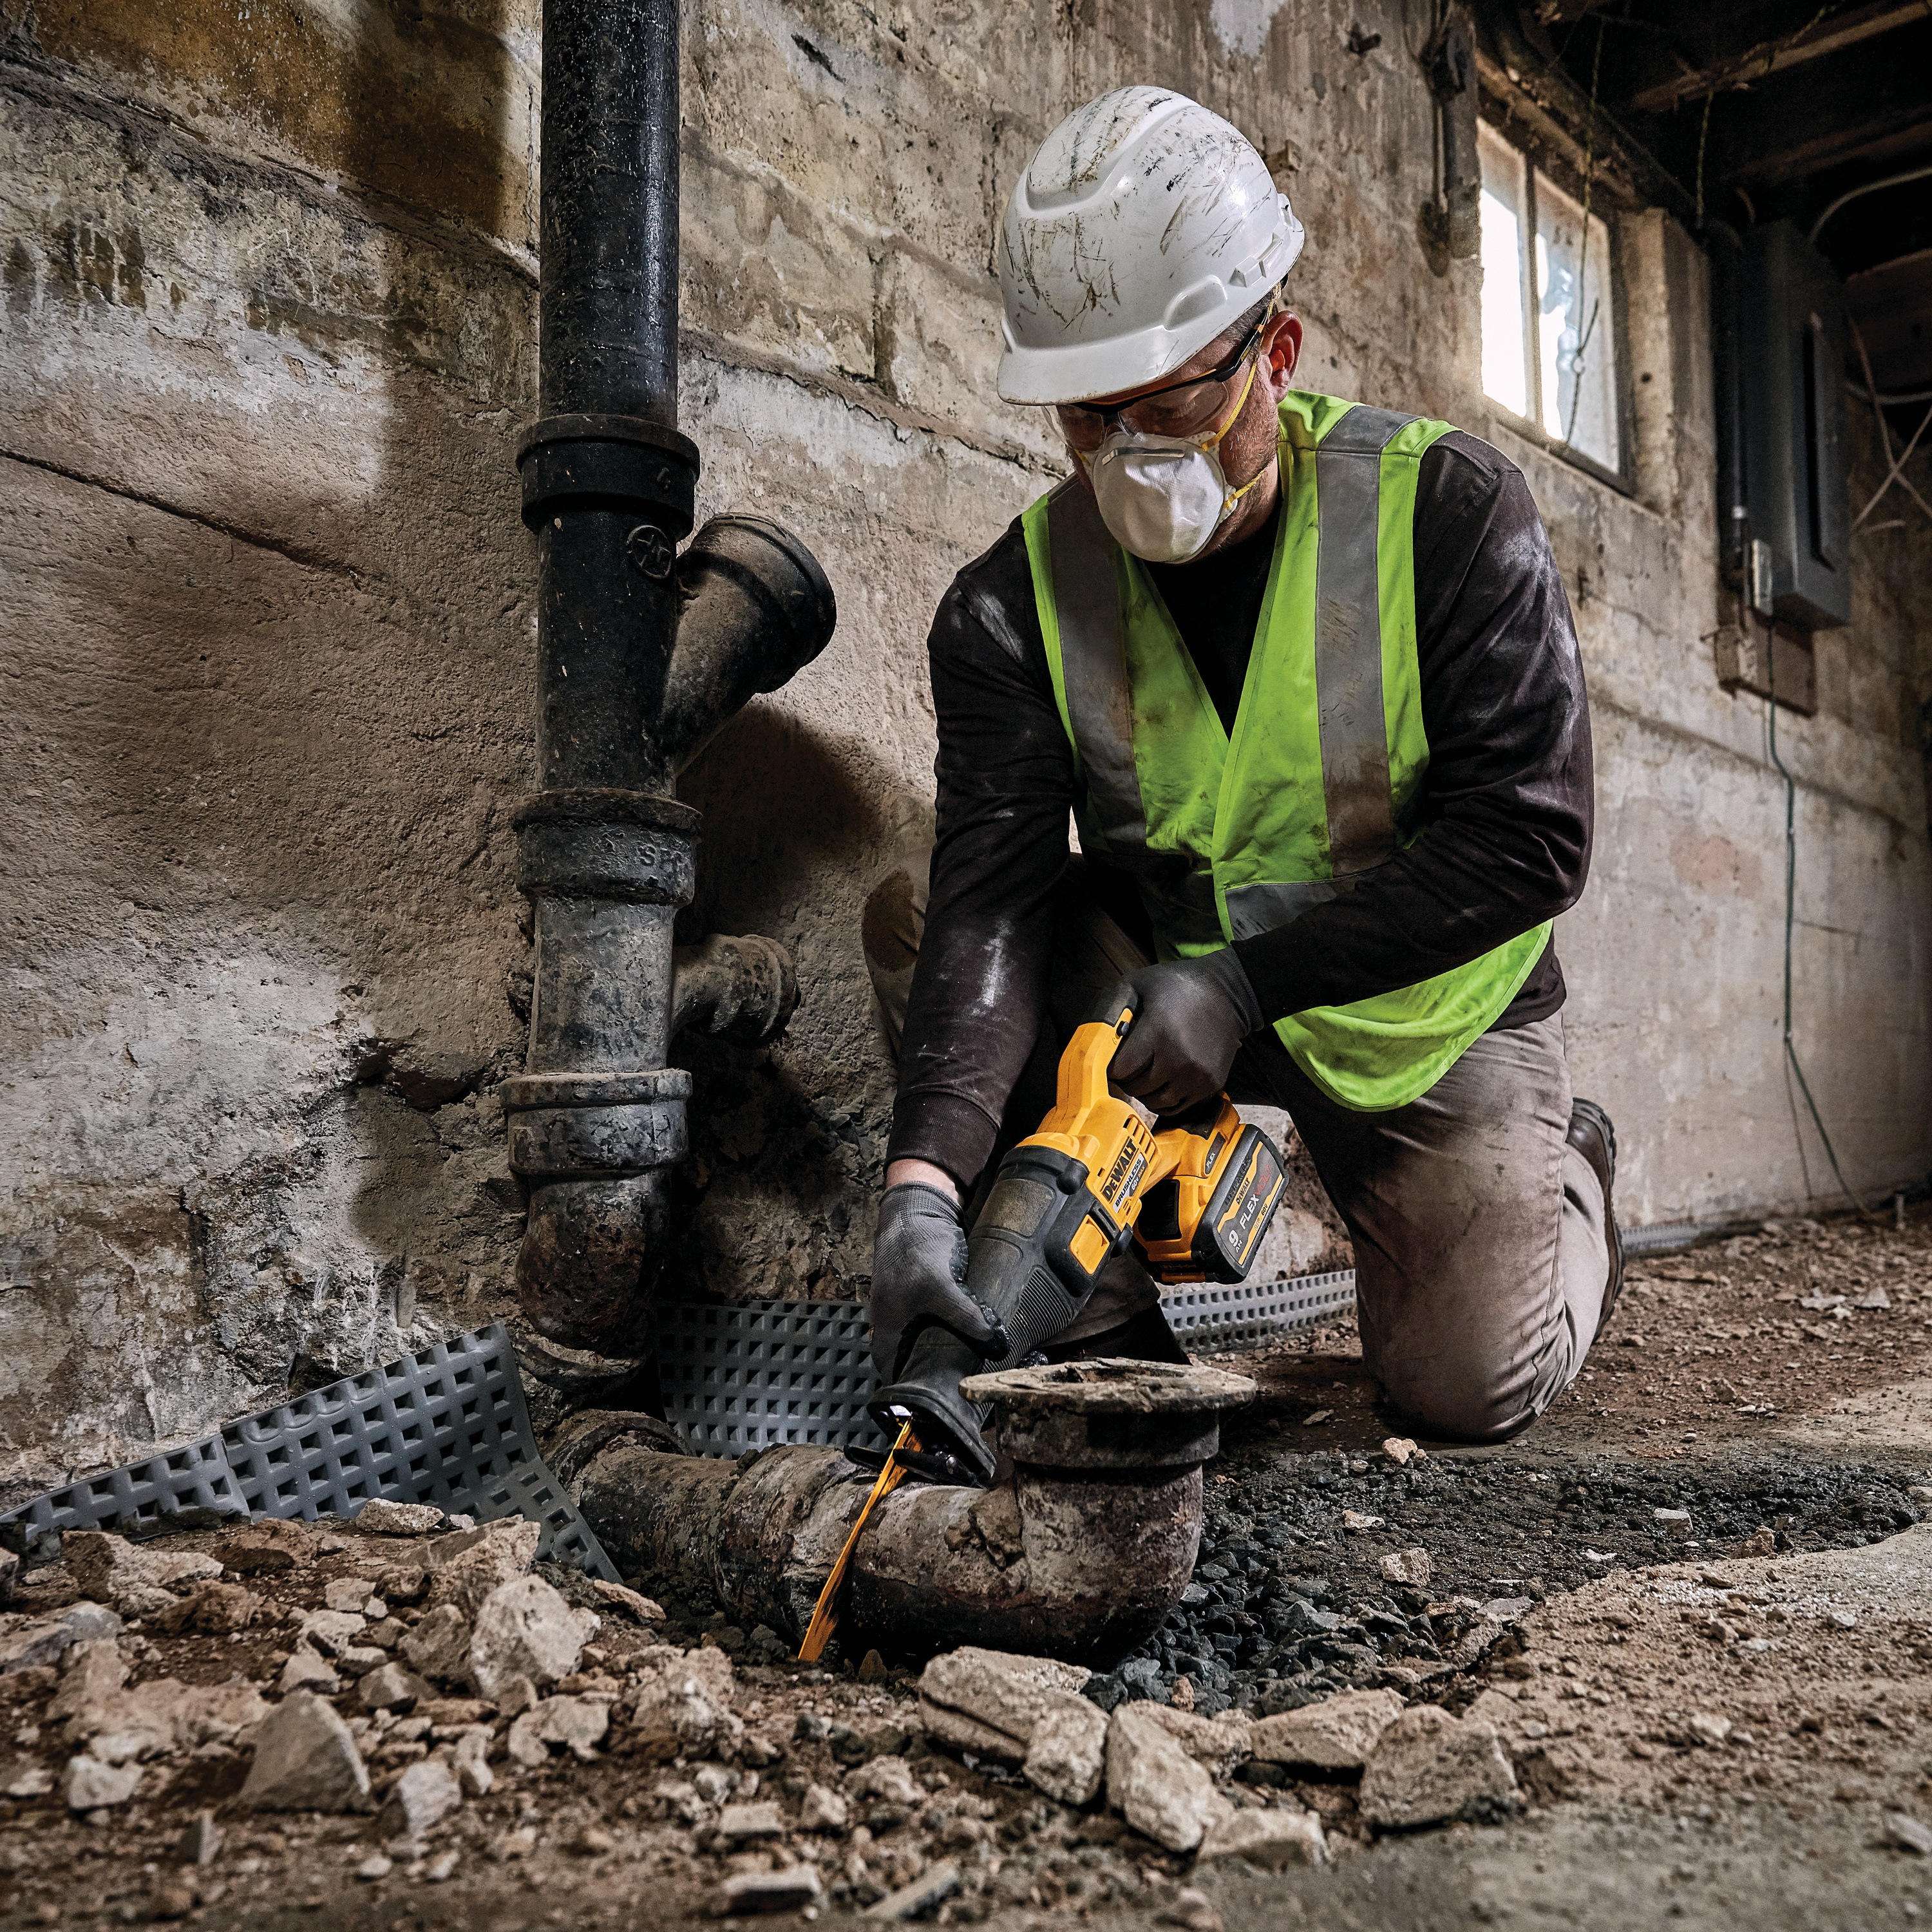 FLEXVOLT brushless cordless reciprocating saw being used by person on drainage pipe.